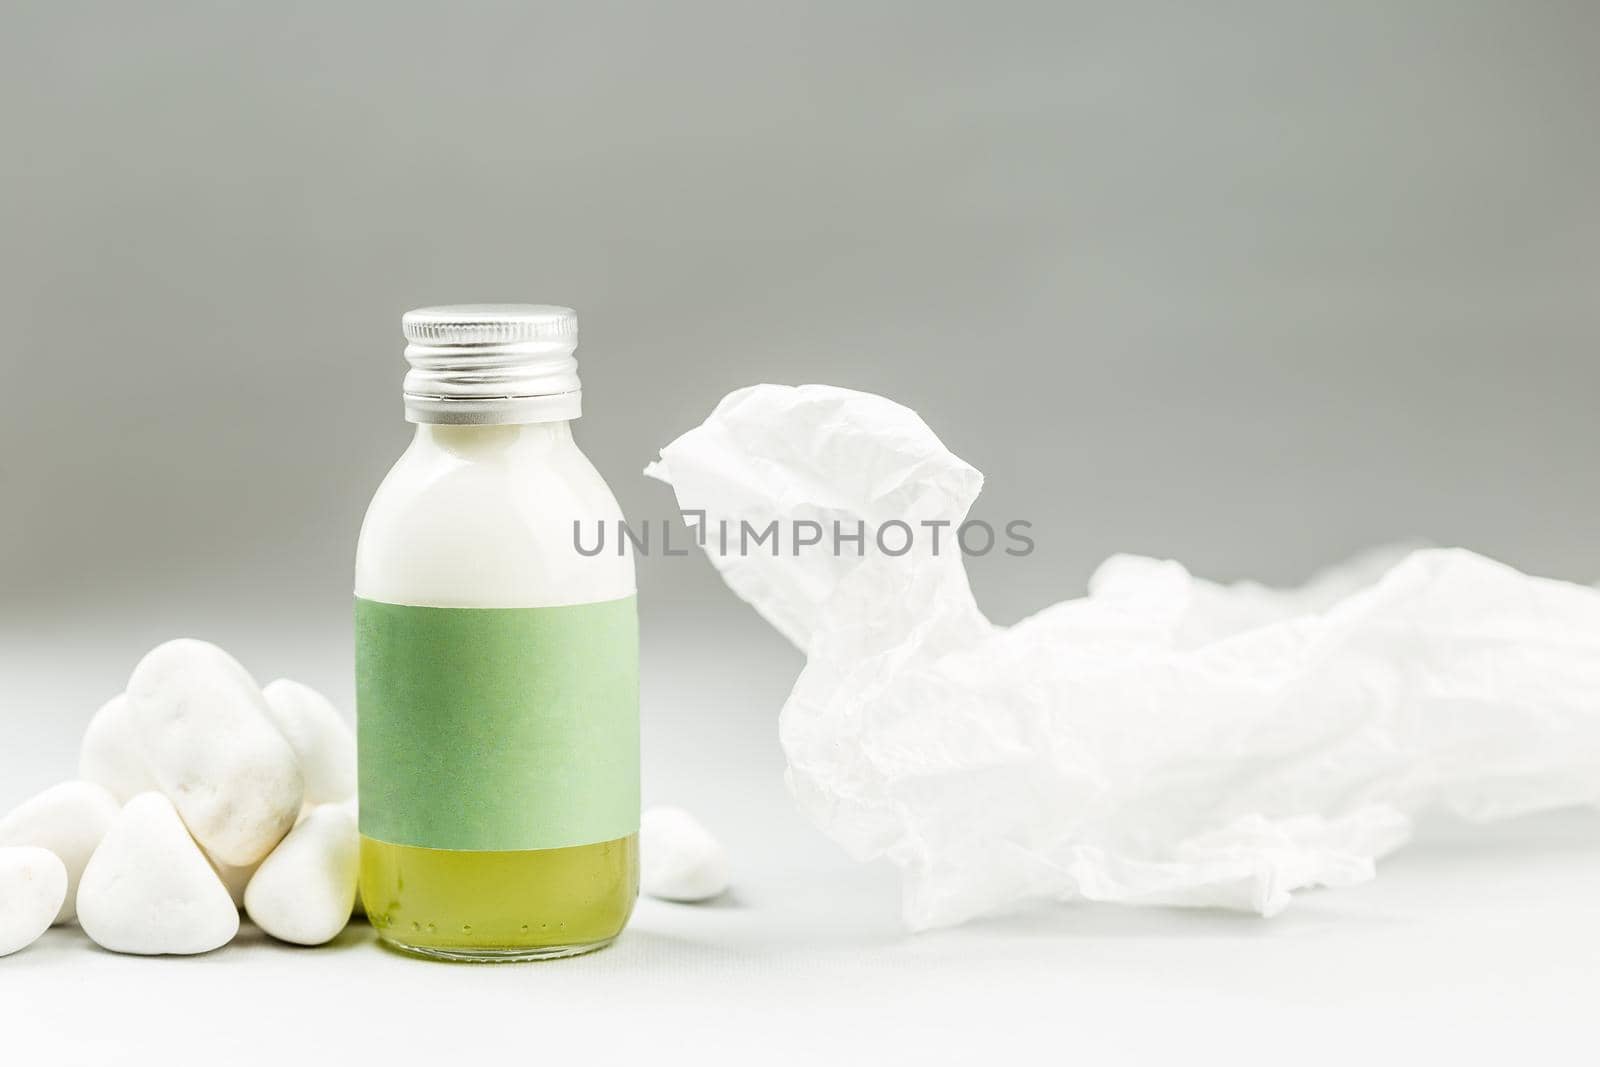 Skin Care Product in Plastic Free Packaging. Glass Bottle with Metal Cap and blank green Label on gray background with white stones and rice paper decoration